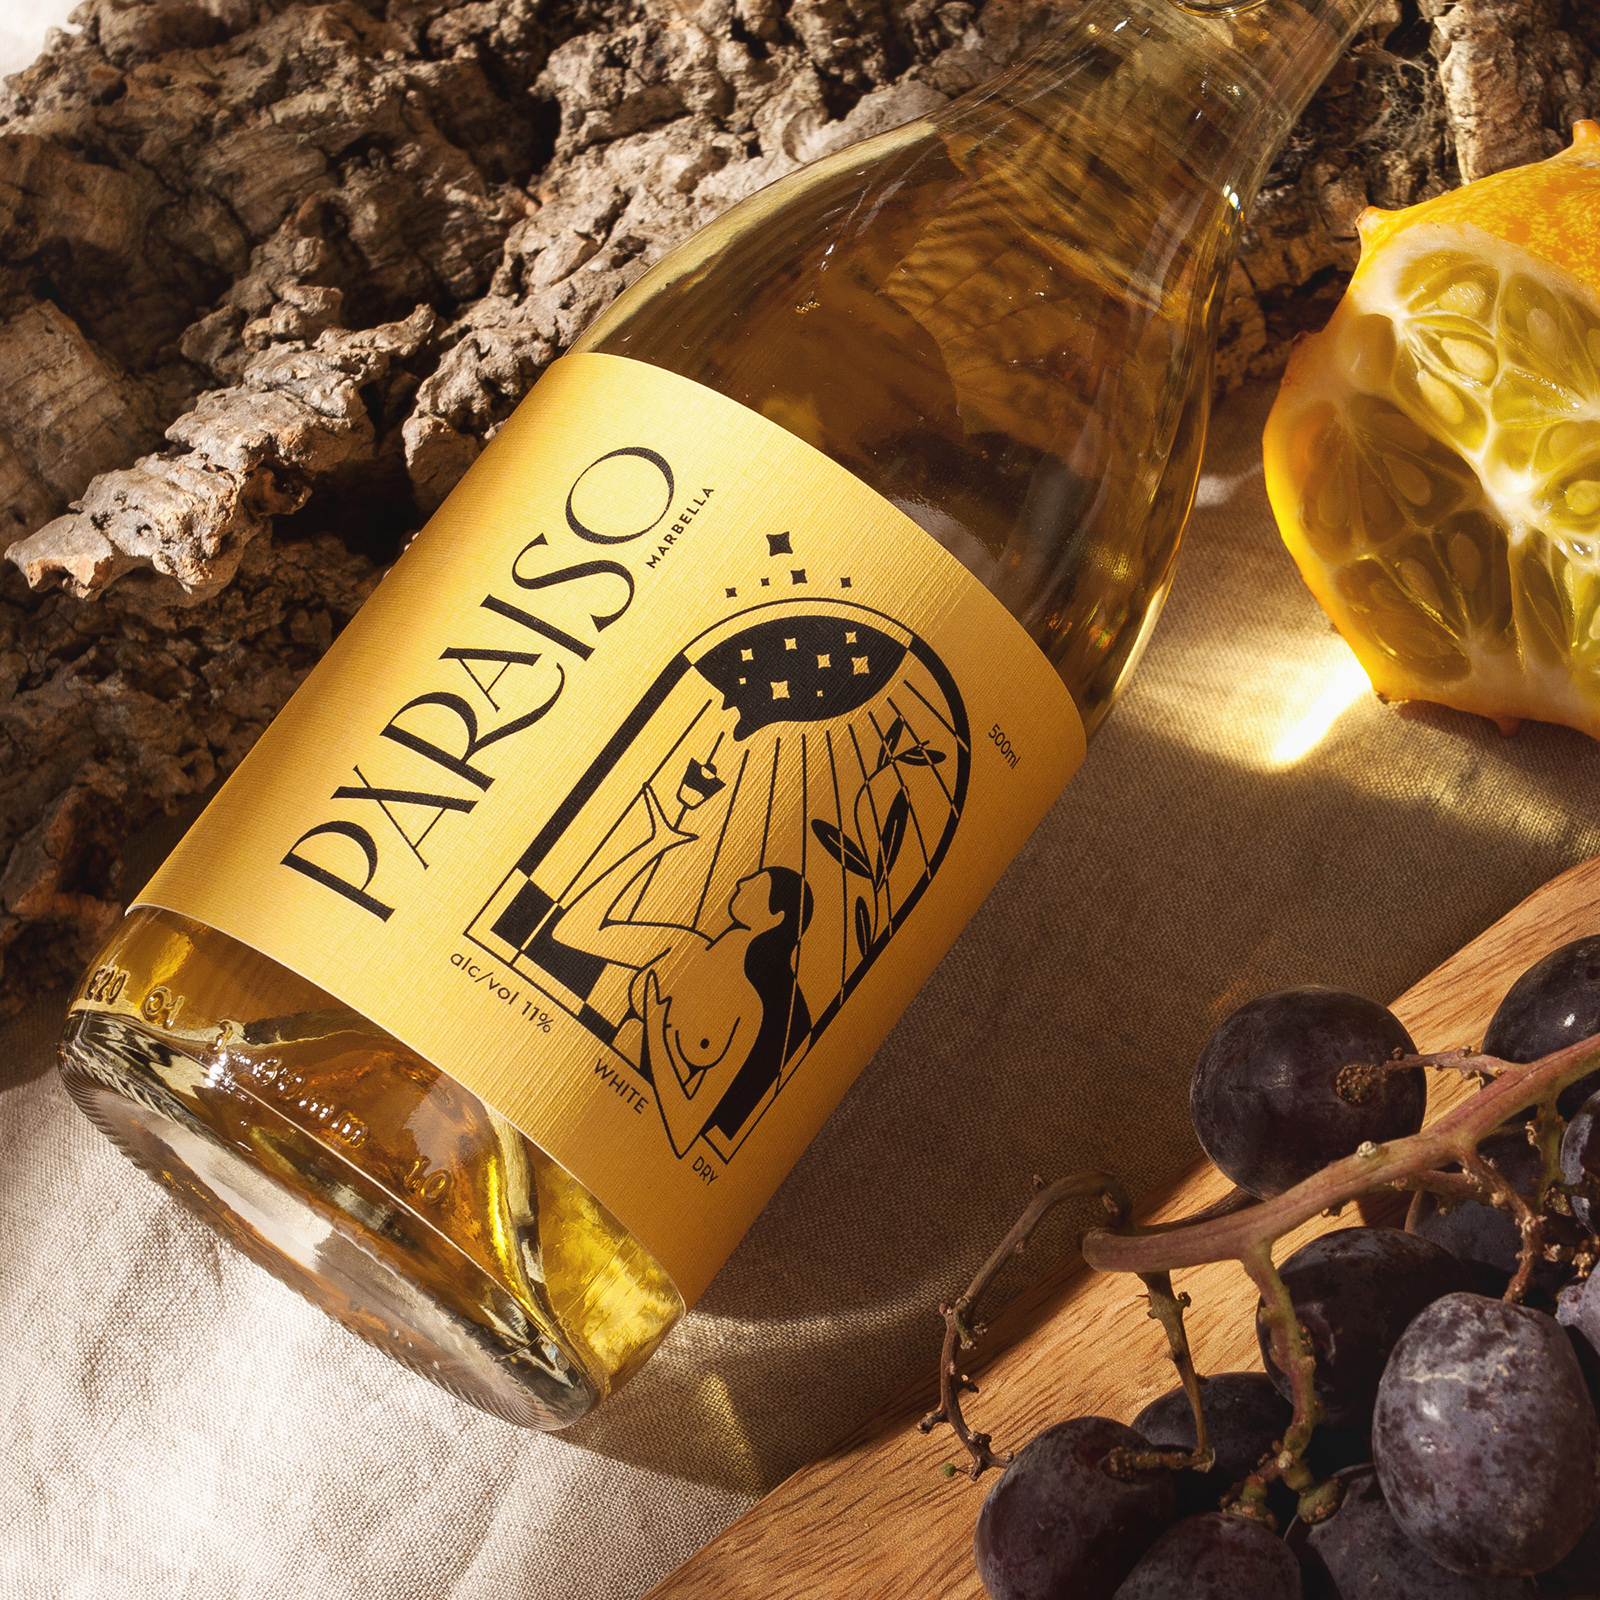 Limited Edition of The Wine Paraiso Marbella